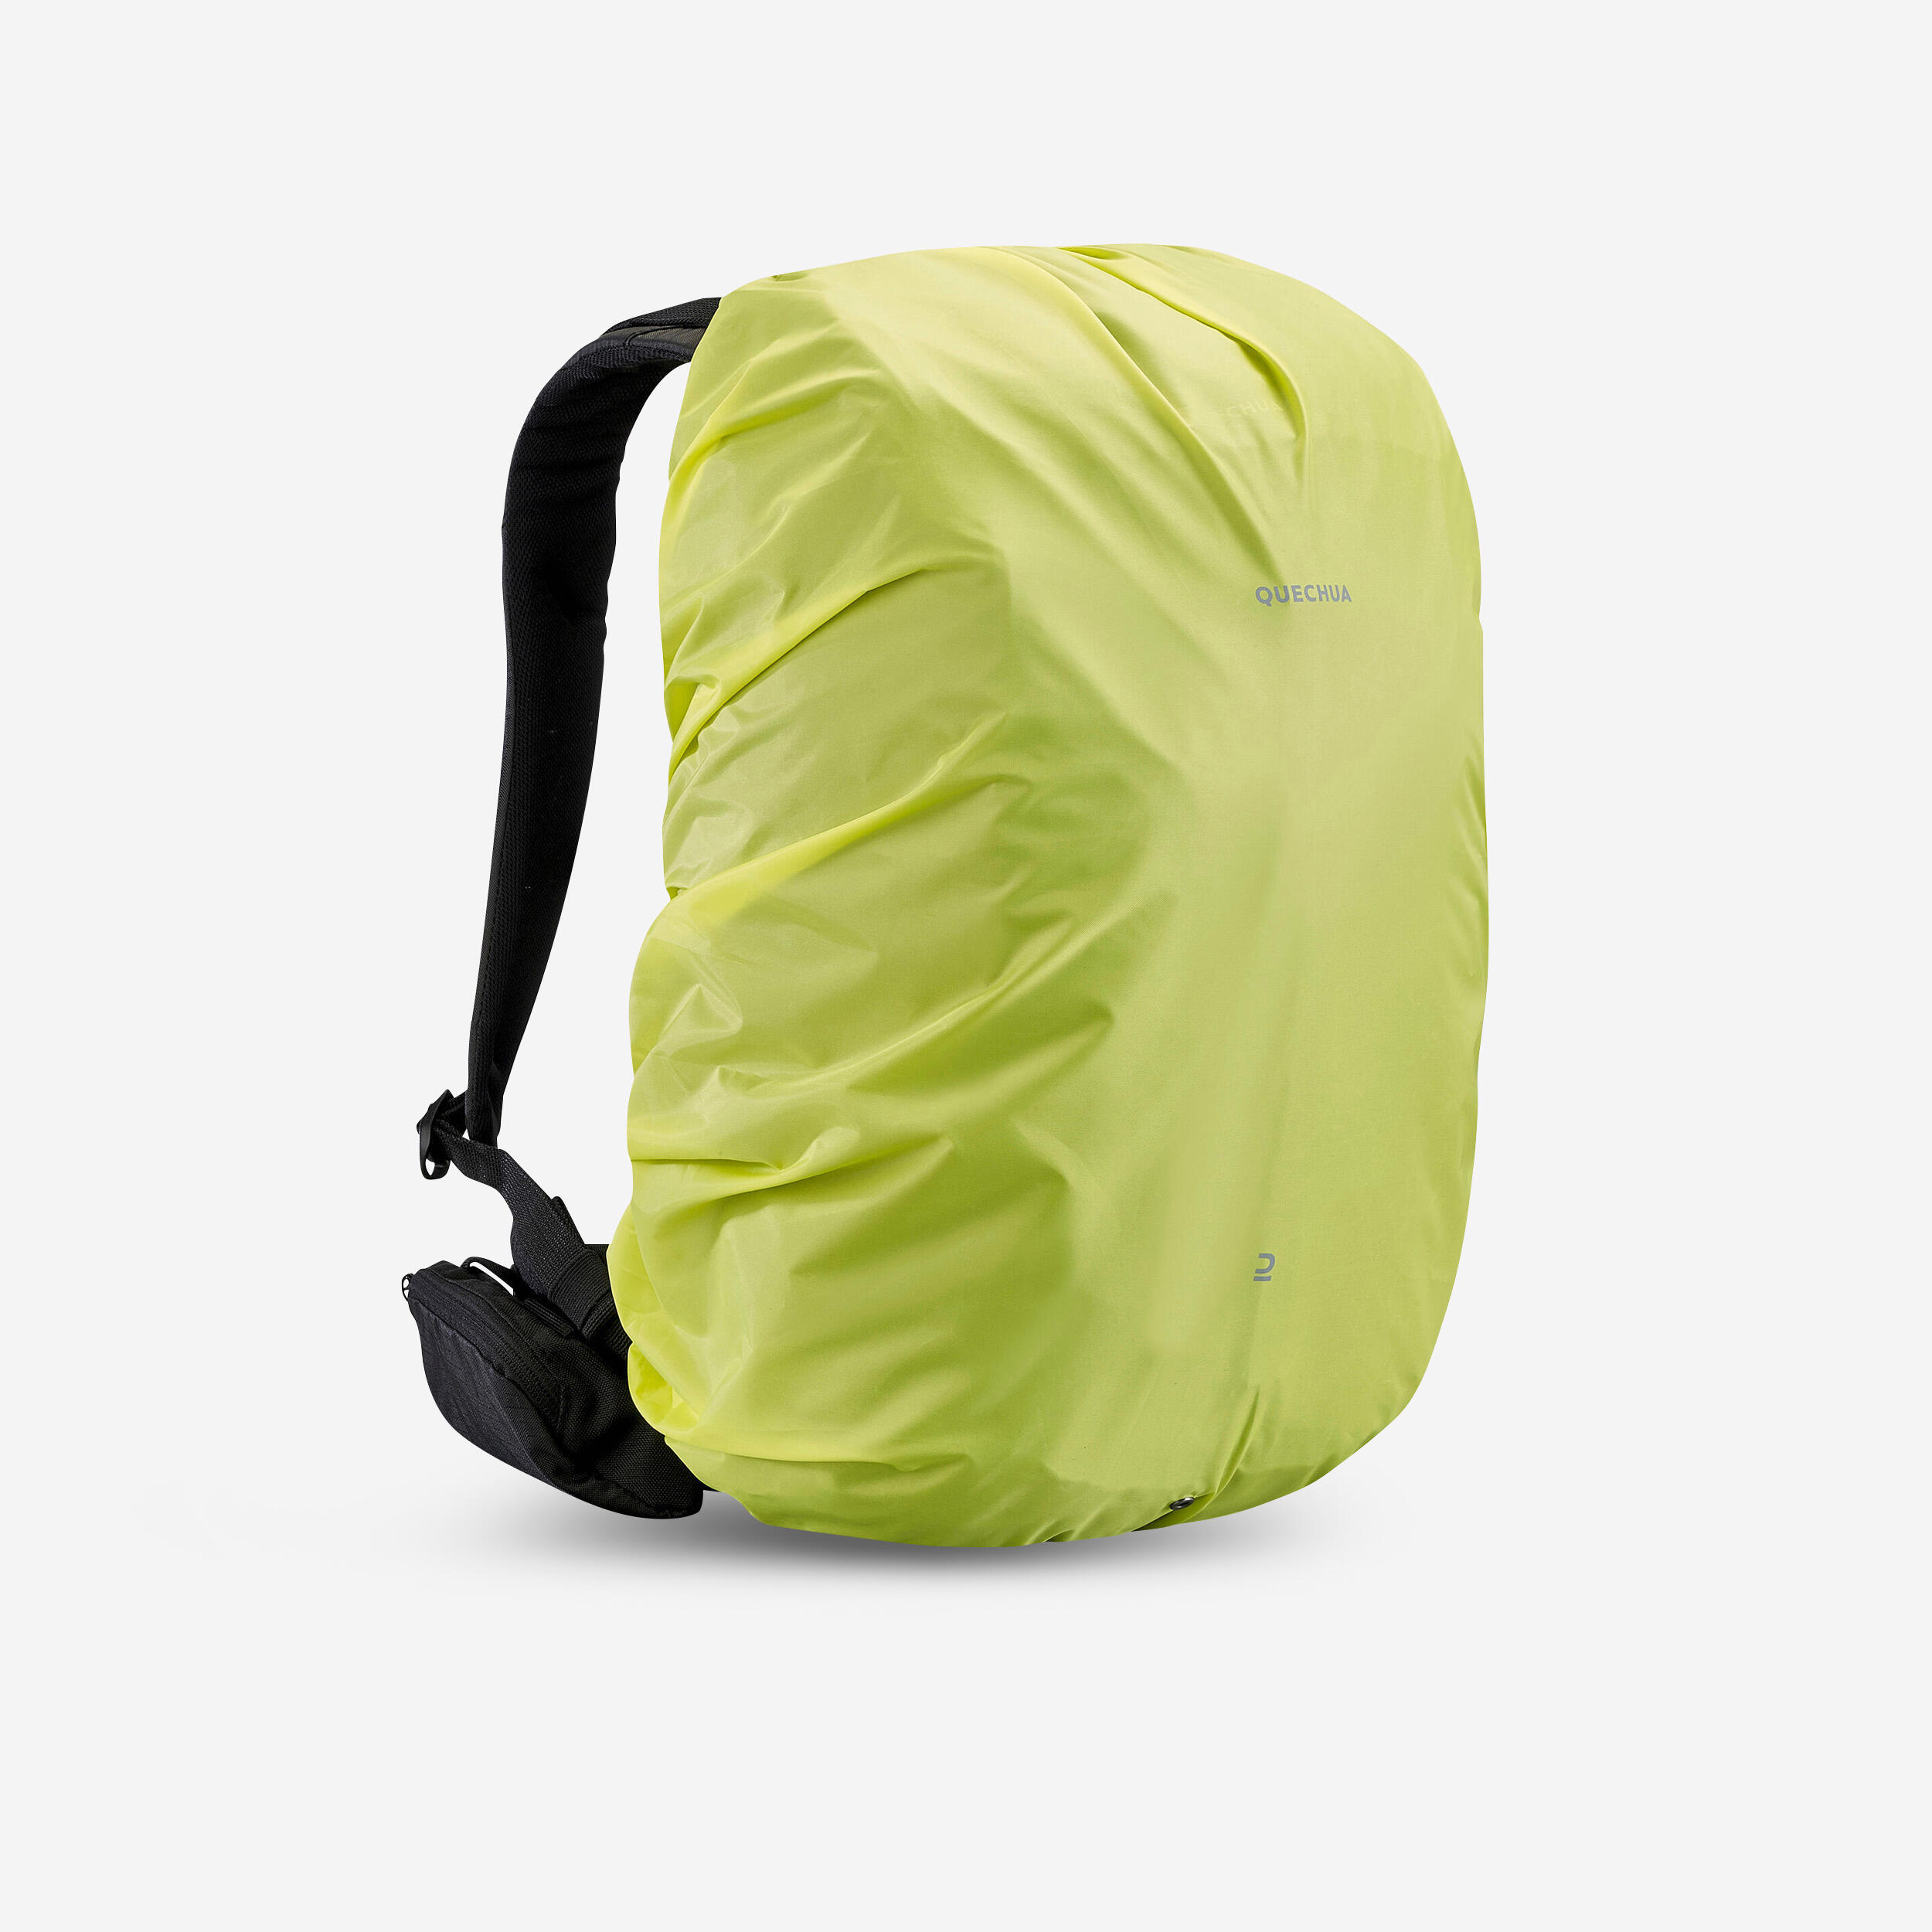 QUECHUA Rain Cover for Hiking Backpack - 10/20 L